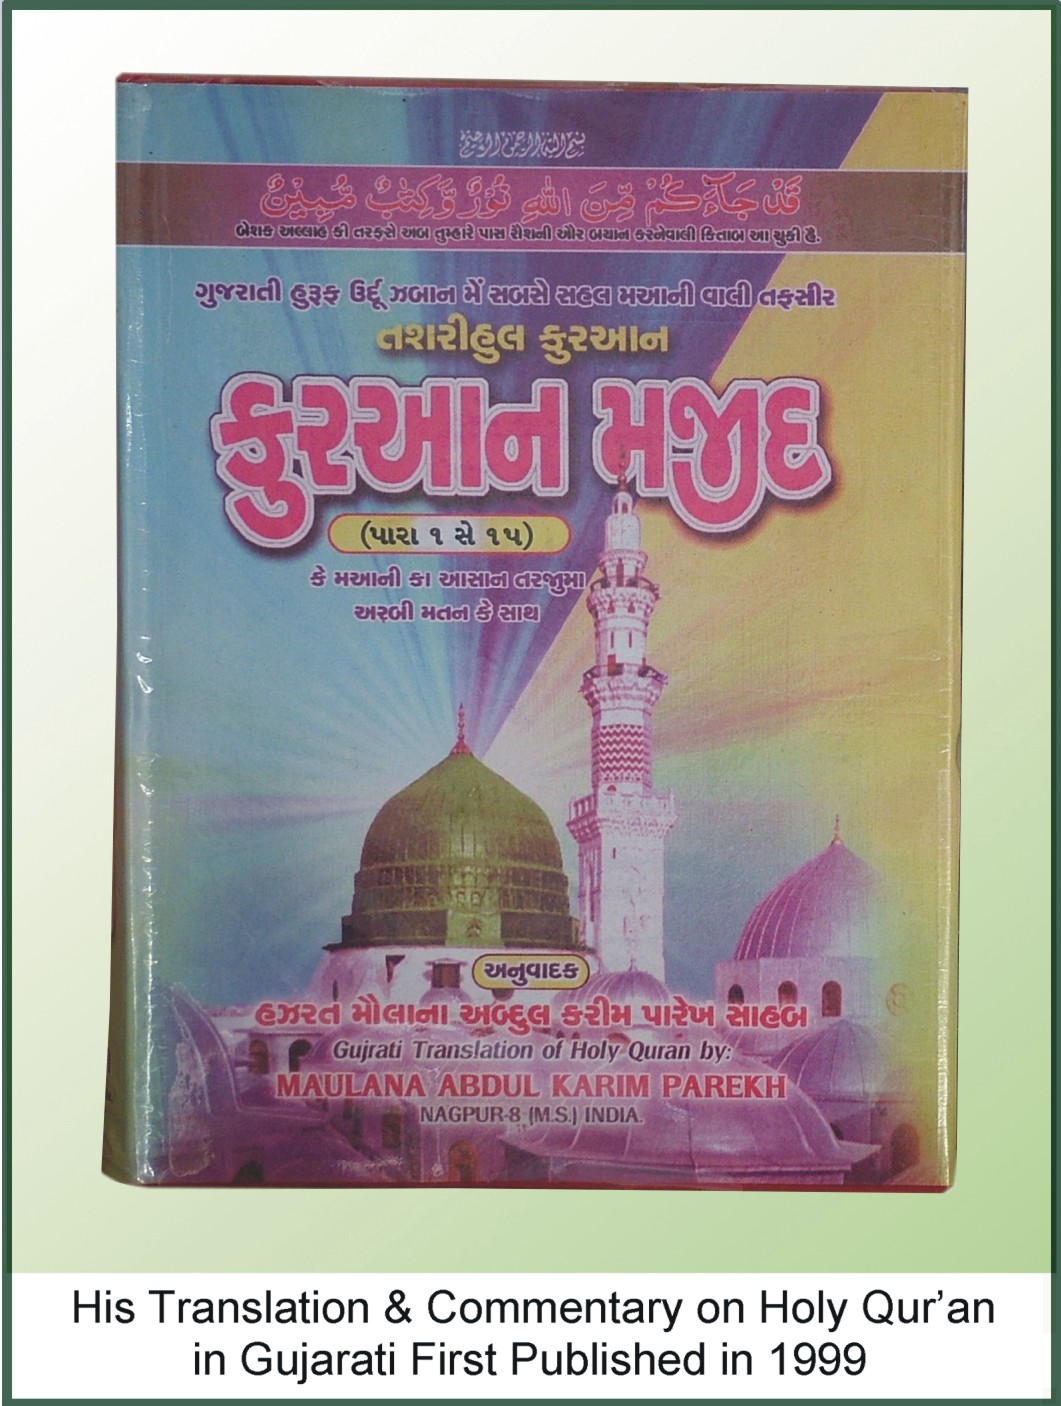 Translation & Commentary of The Holy Qur'an (Gujarati) First Published in 1999